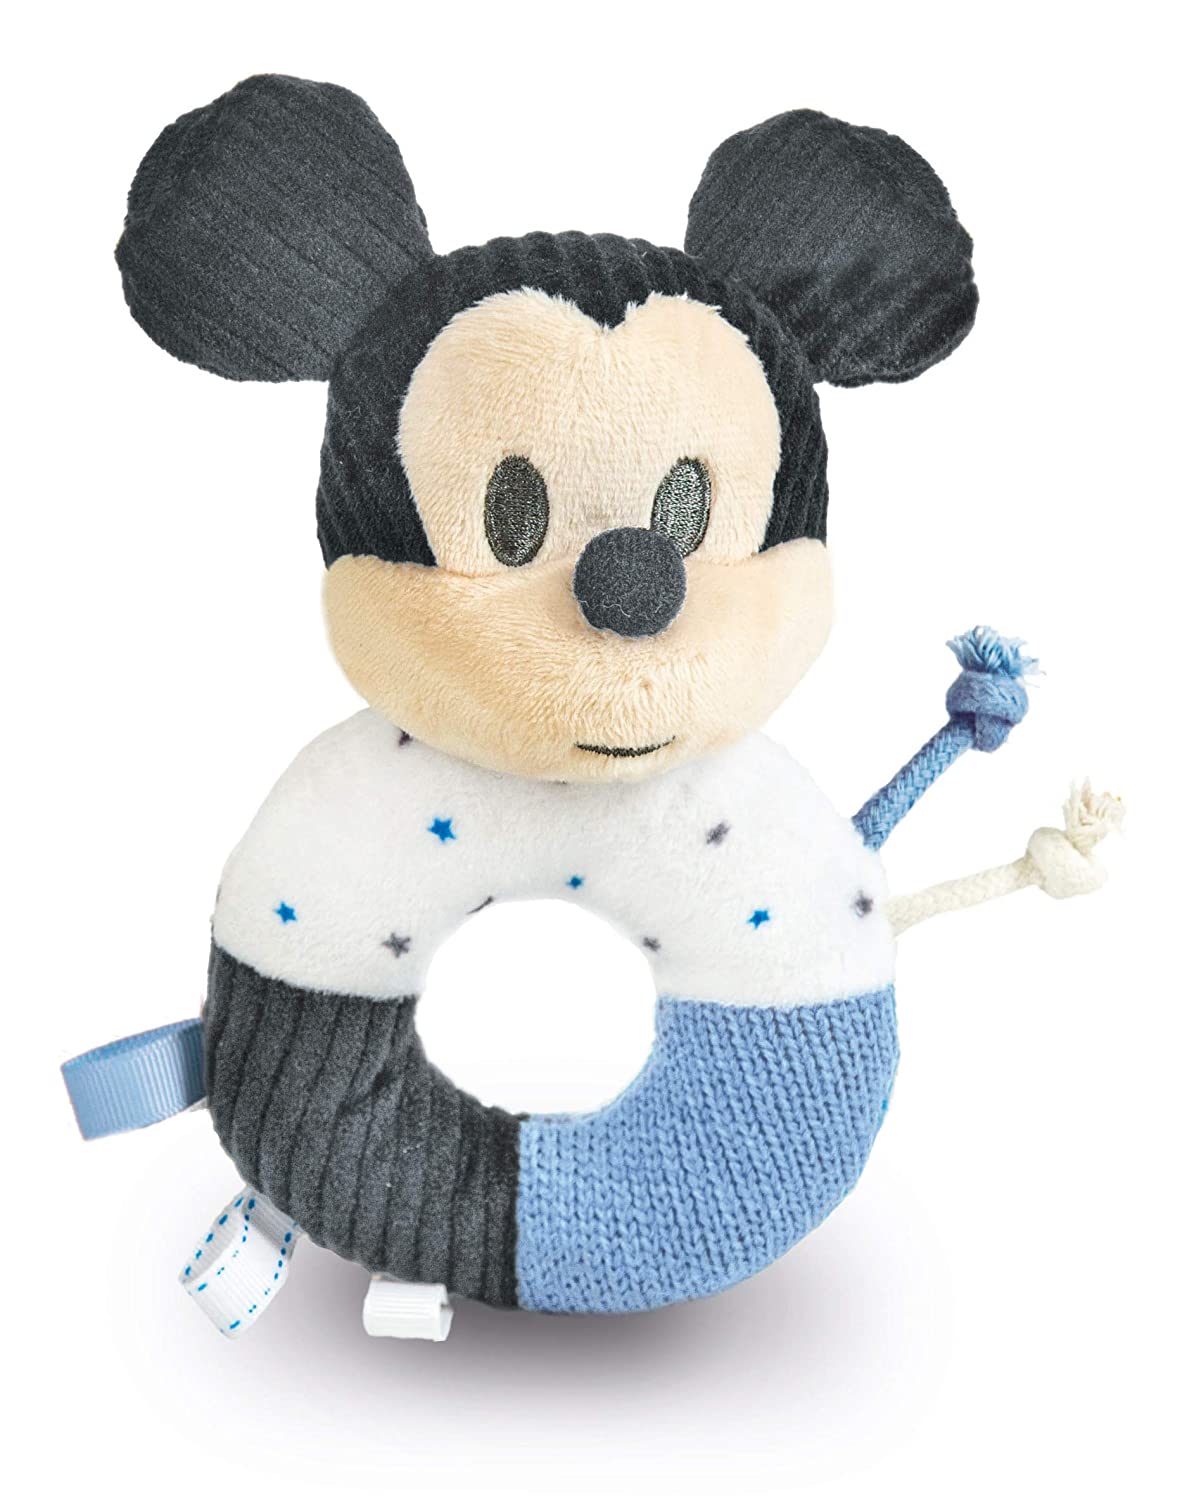 Clementoni 17339 Clementoni-17339-Disney Baby Mickey Maraca Rattle Soft Ring Rattle Toy for Toddlers from 0 Months Machine Washable Multicoloured